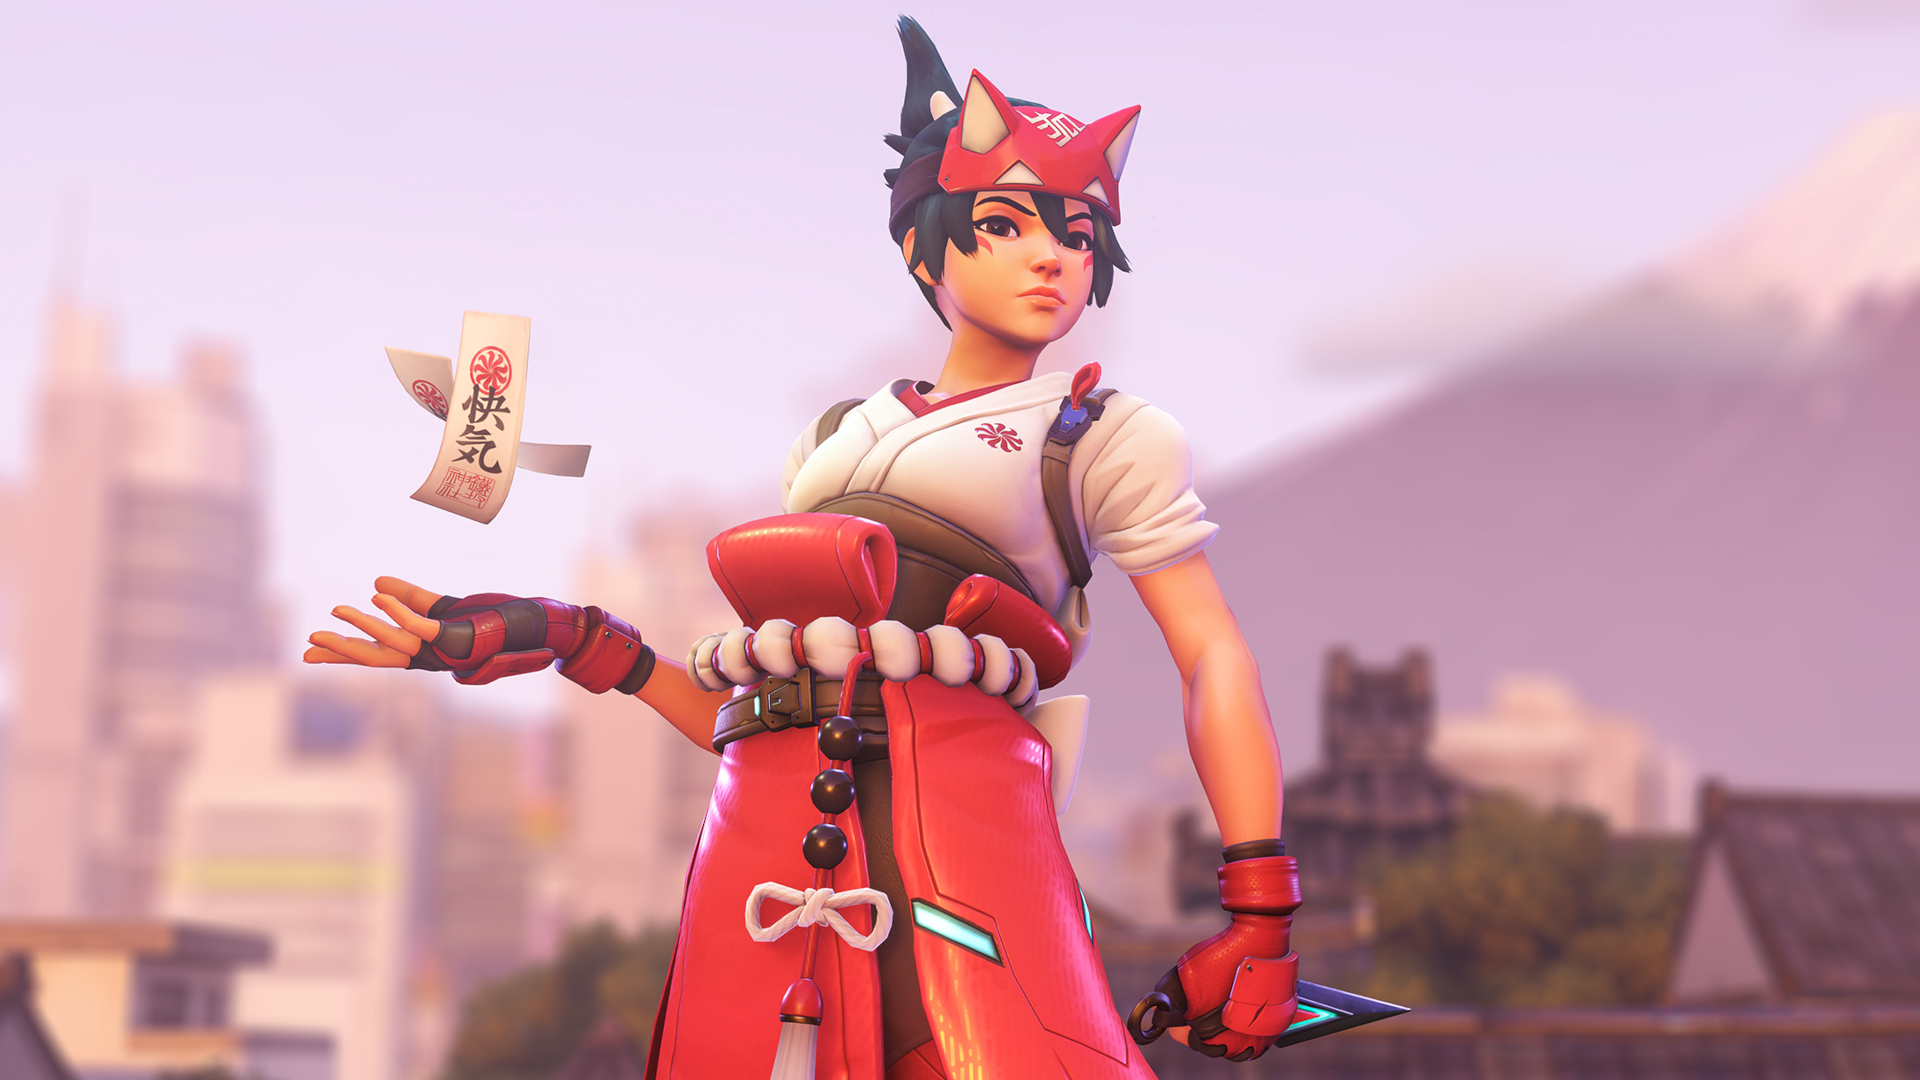 In Overwatch 2, Kiriko holds a knife and levitates two small parchments